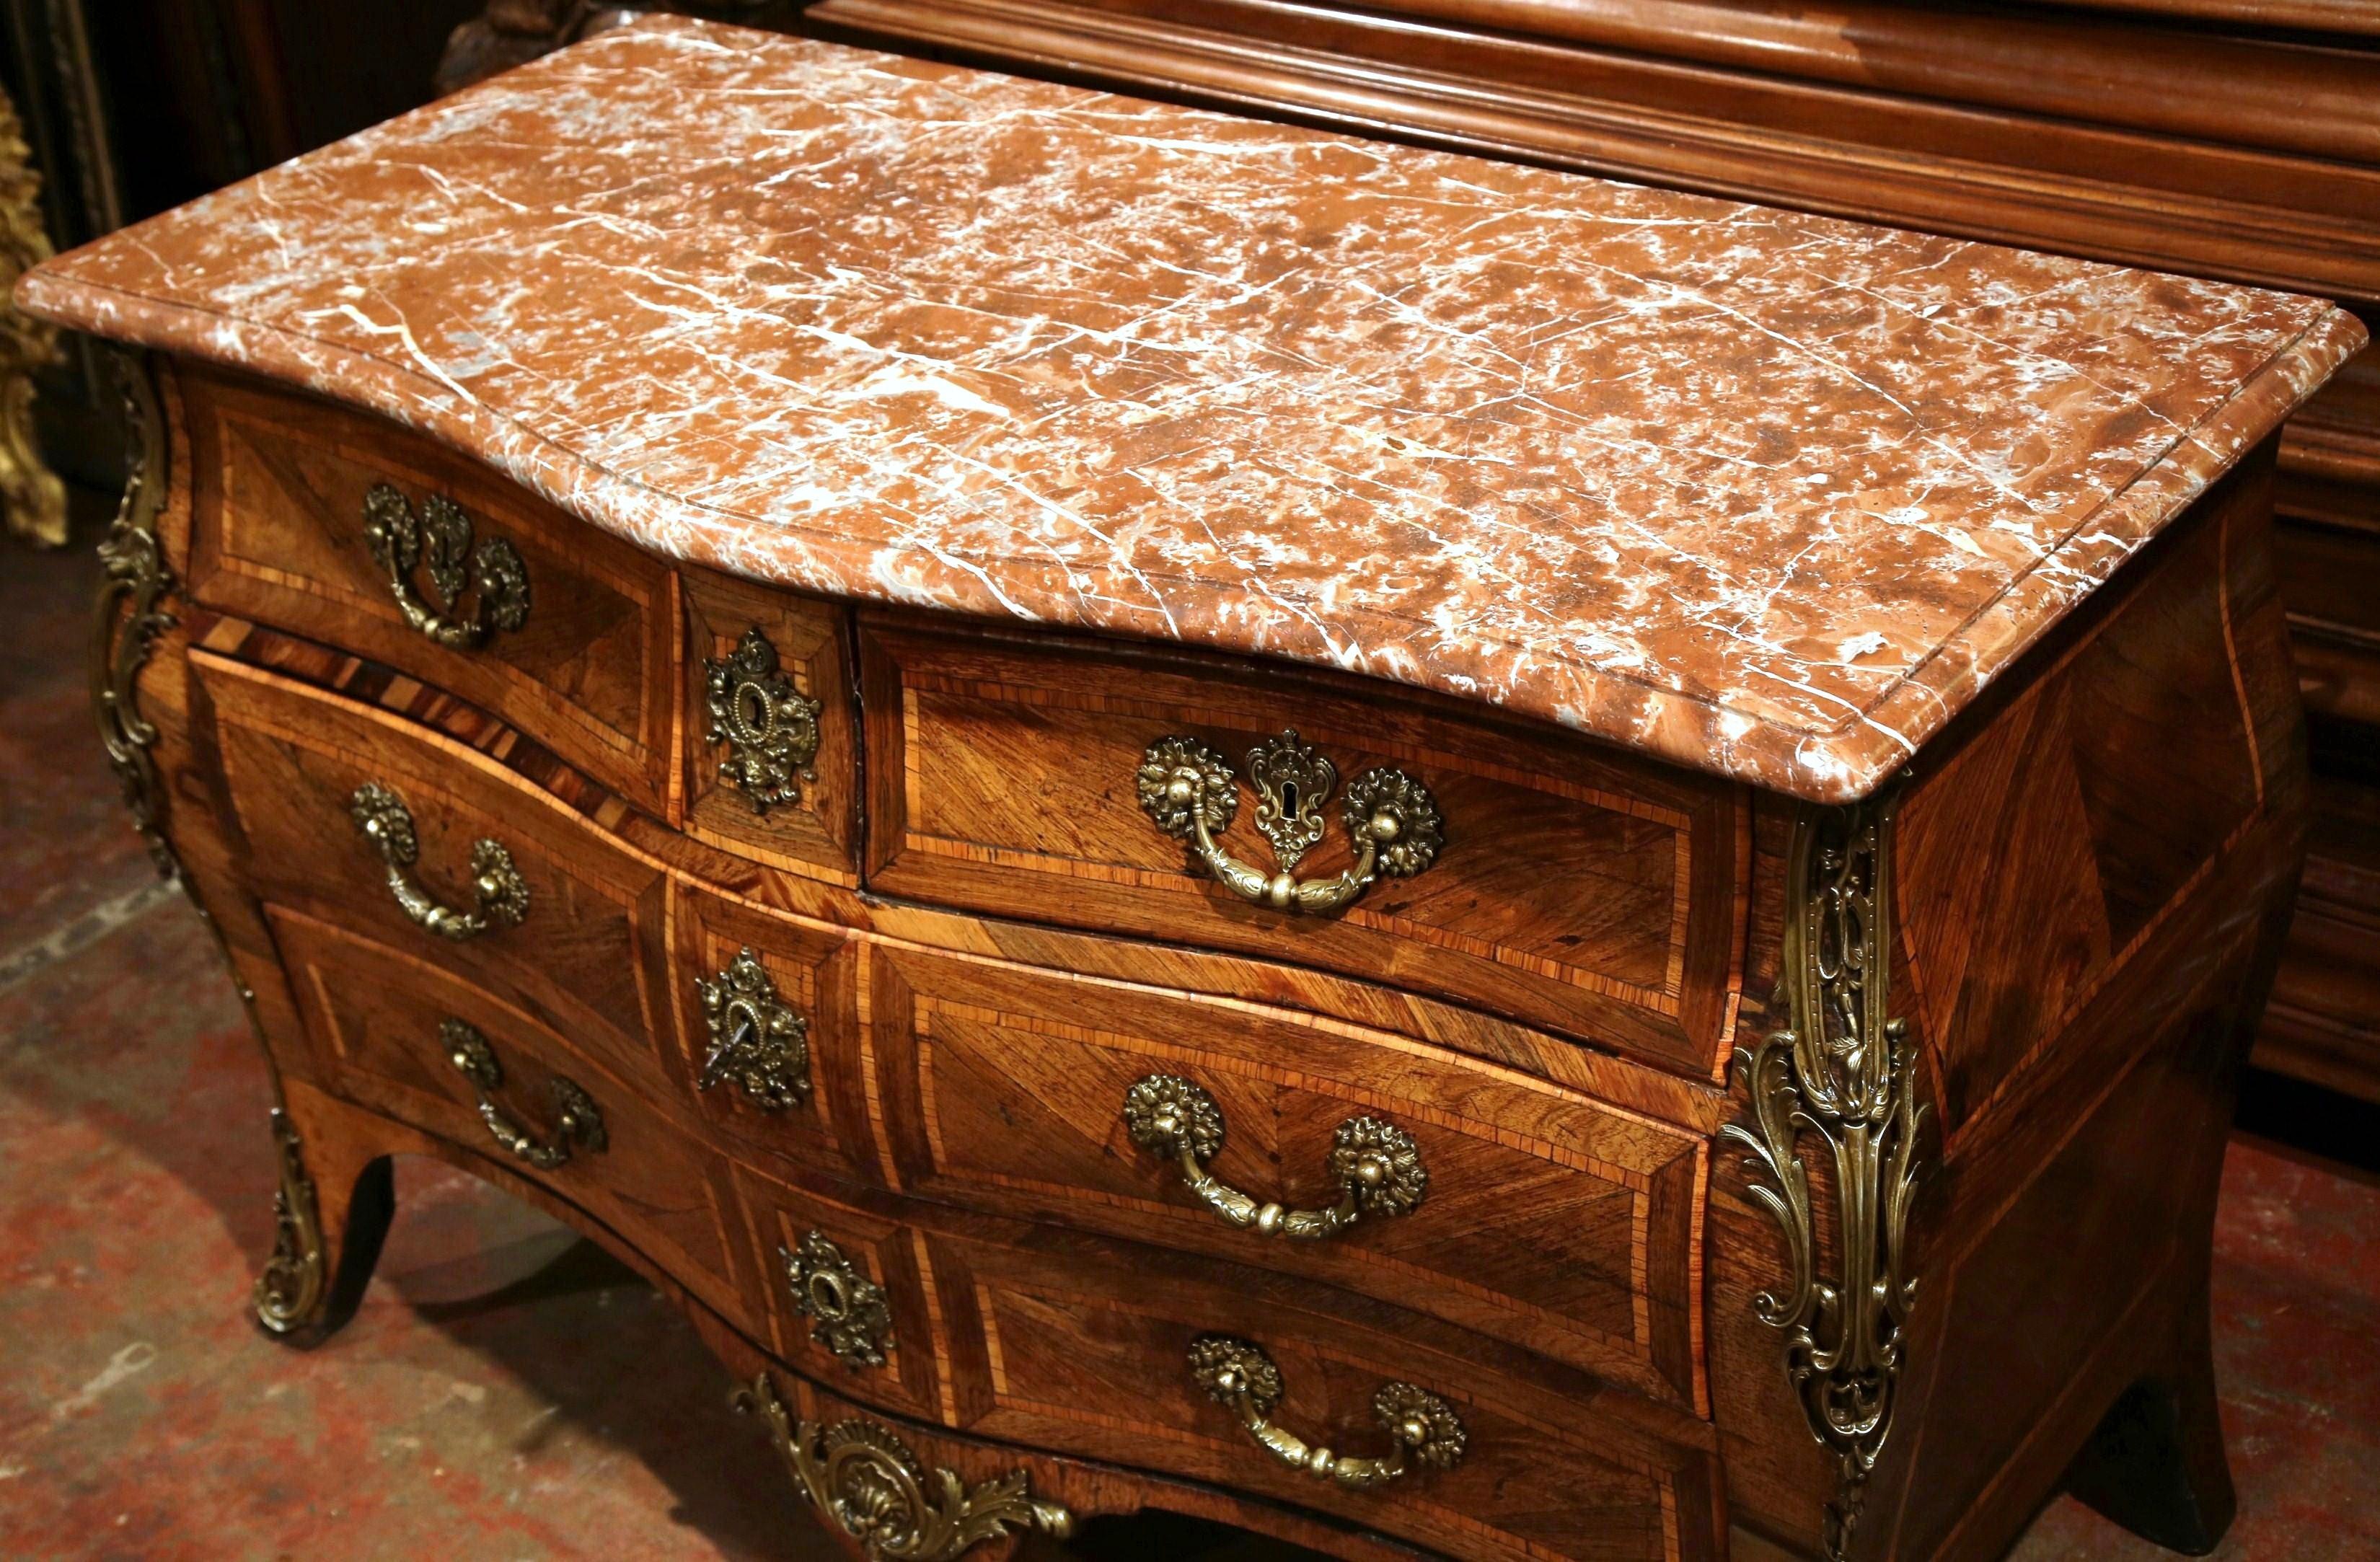 Hand-Carved 18th Century French Louis XV Walnut Inlay Bombe Chest of Drawers with Marble Top For Sale